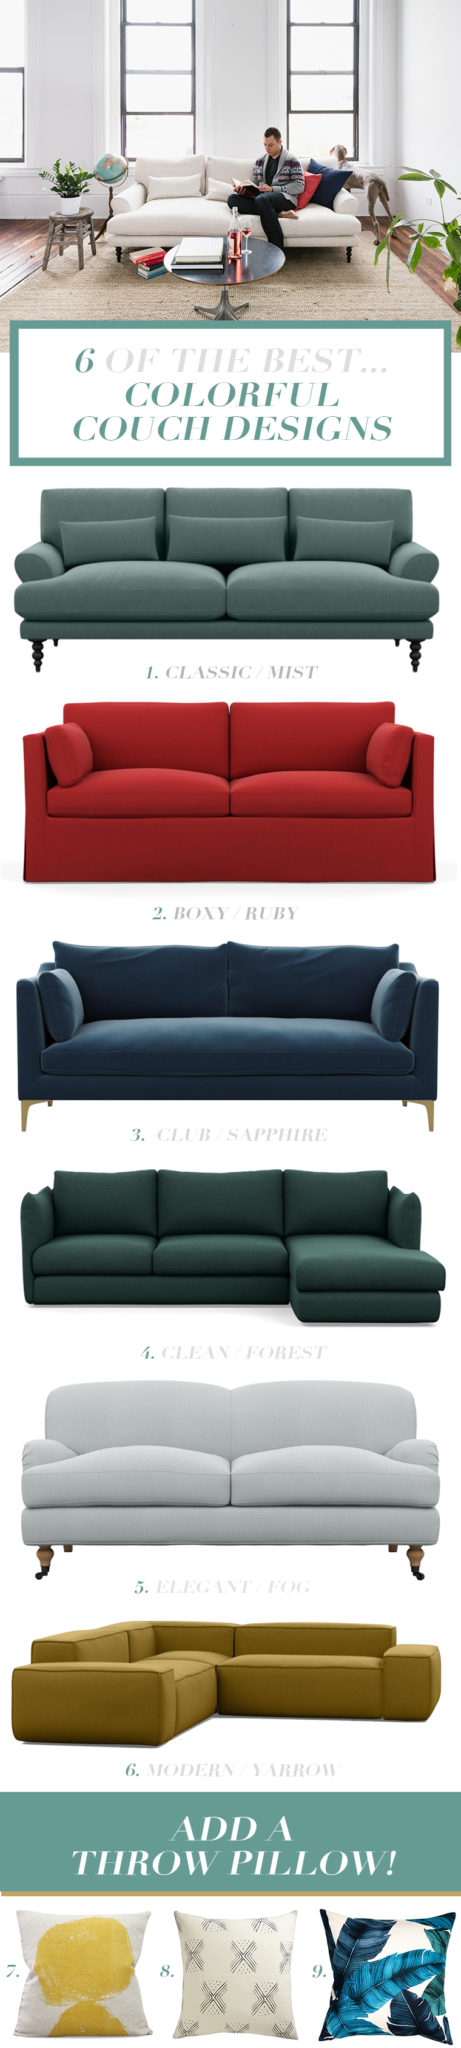 Colorful Couch Designs